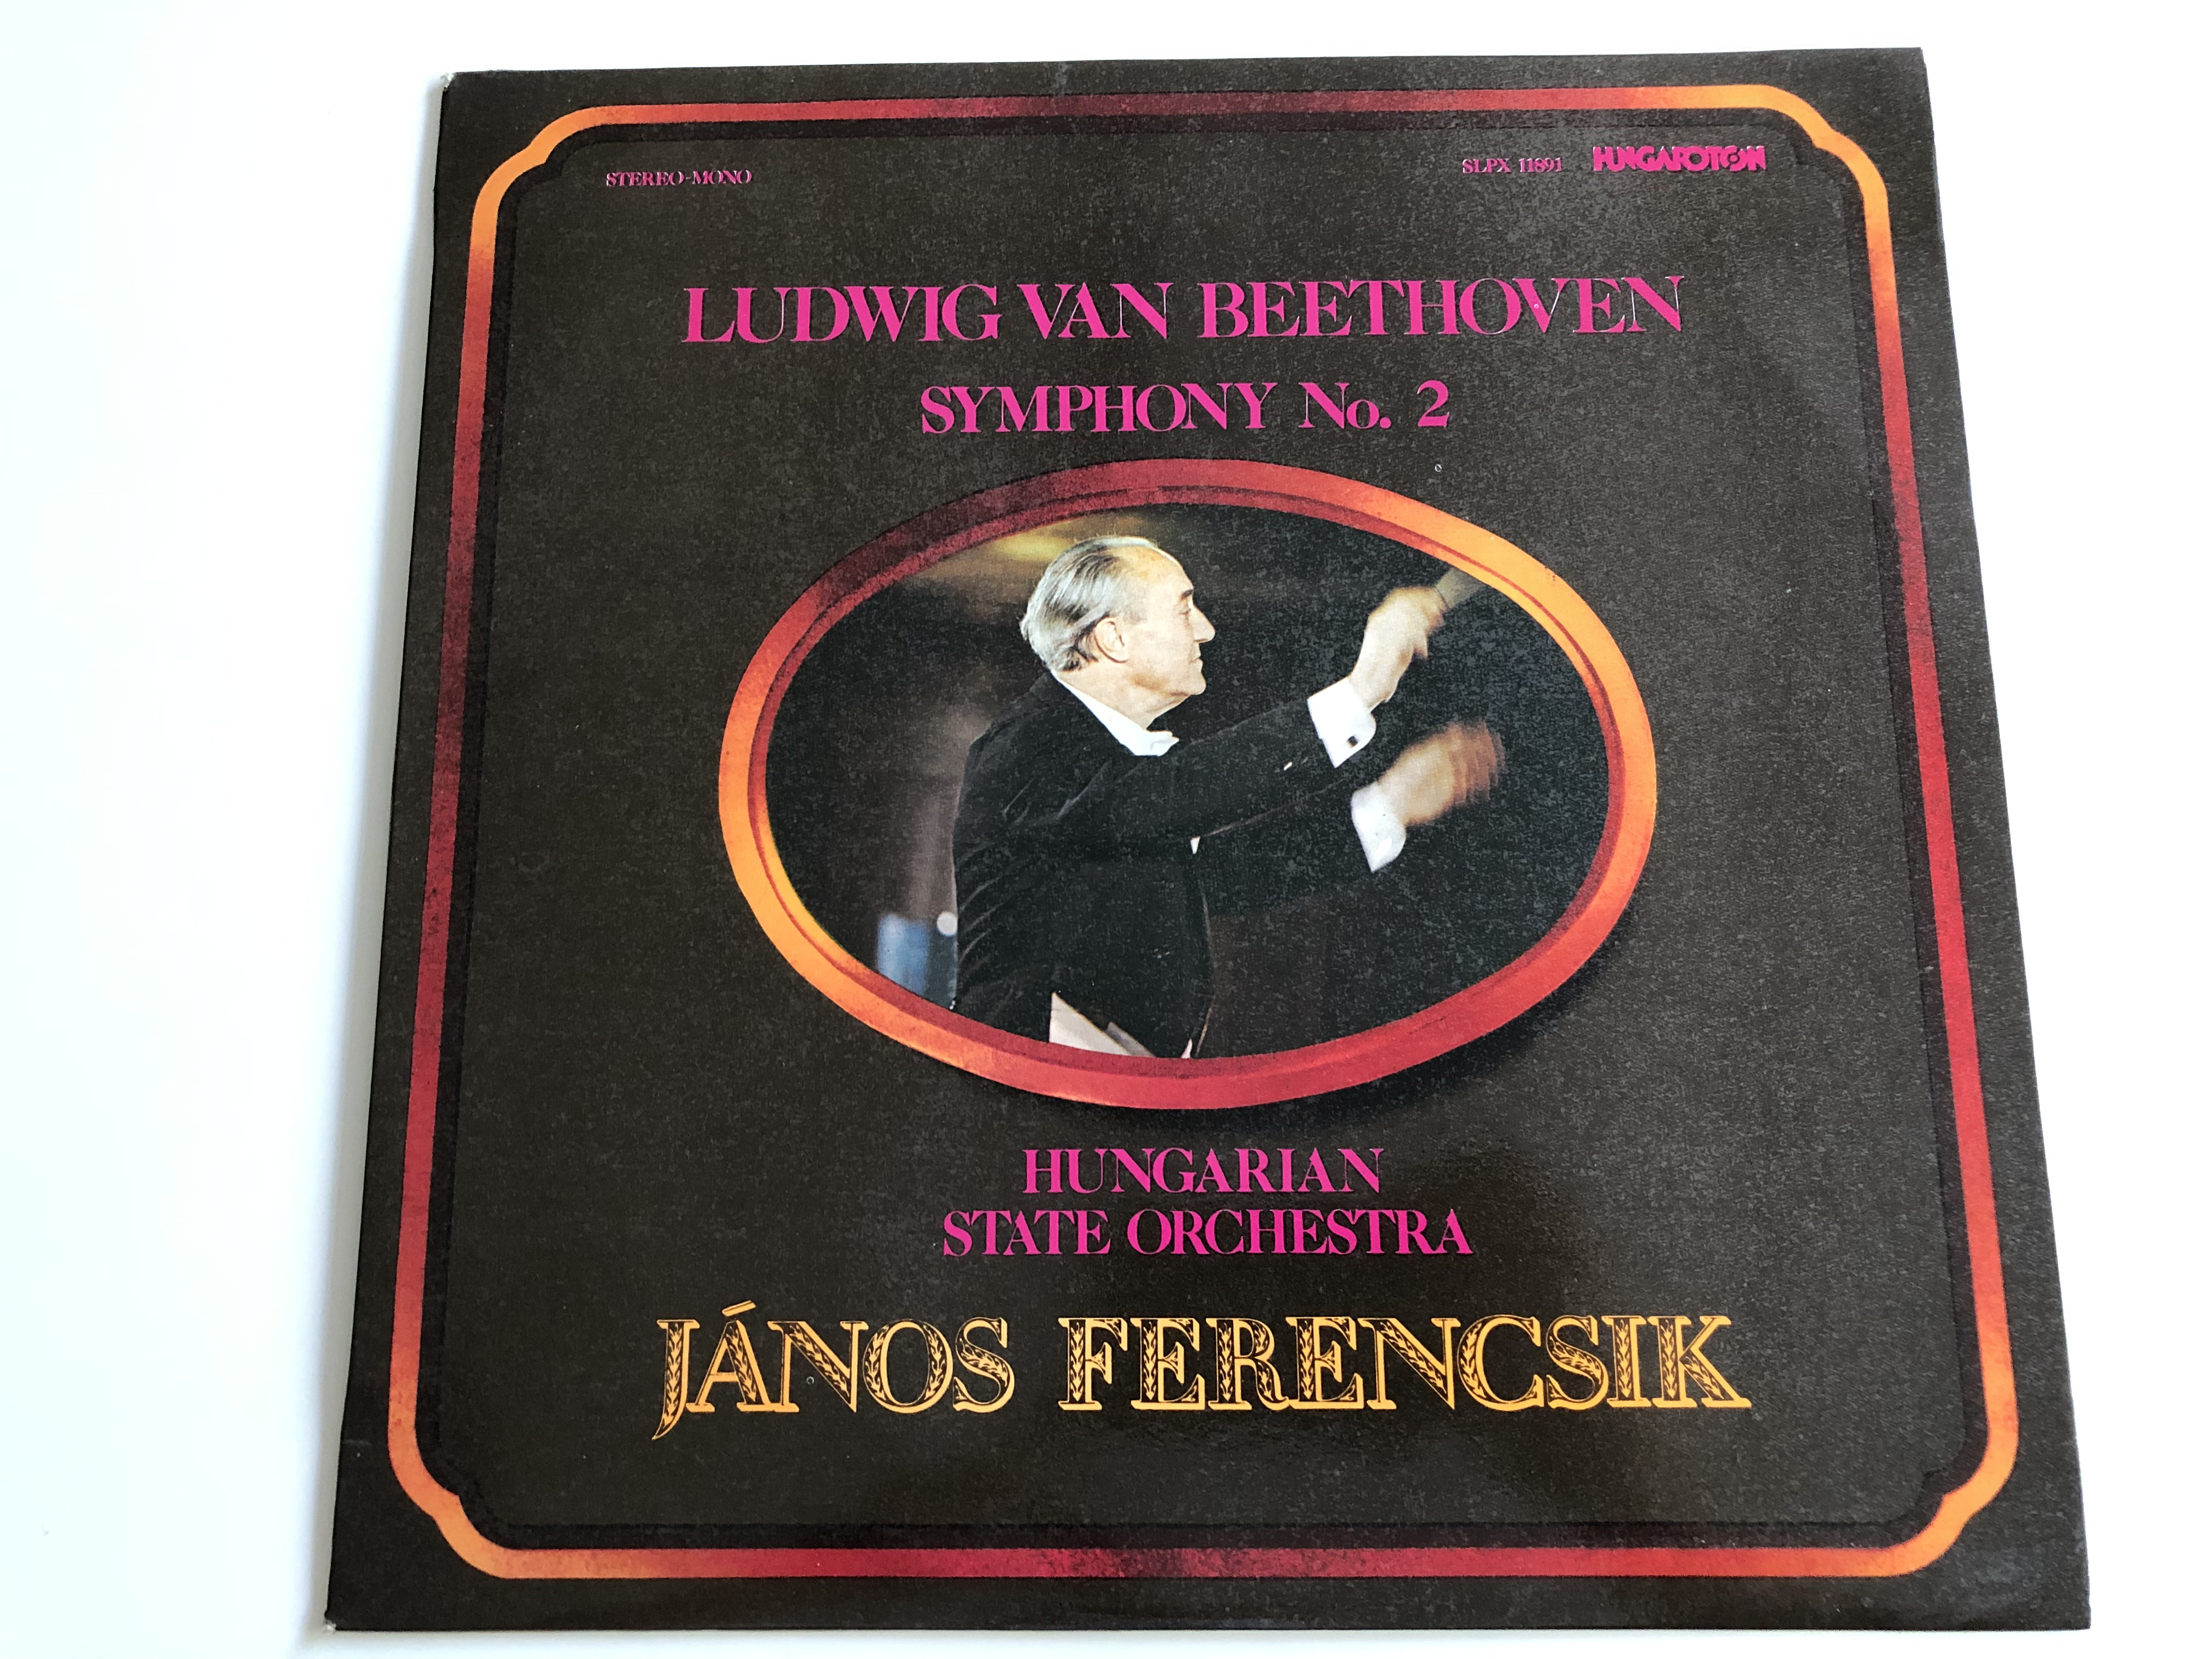 ludwig-van-beethoven-symphony-no.-2-stereo-mono-lp-hungarian-state-orchestra-conducted-by-j-nos-ferencsik-hungaroton-slpx-11891-1-.jpg